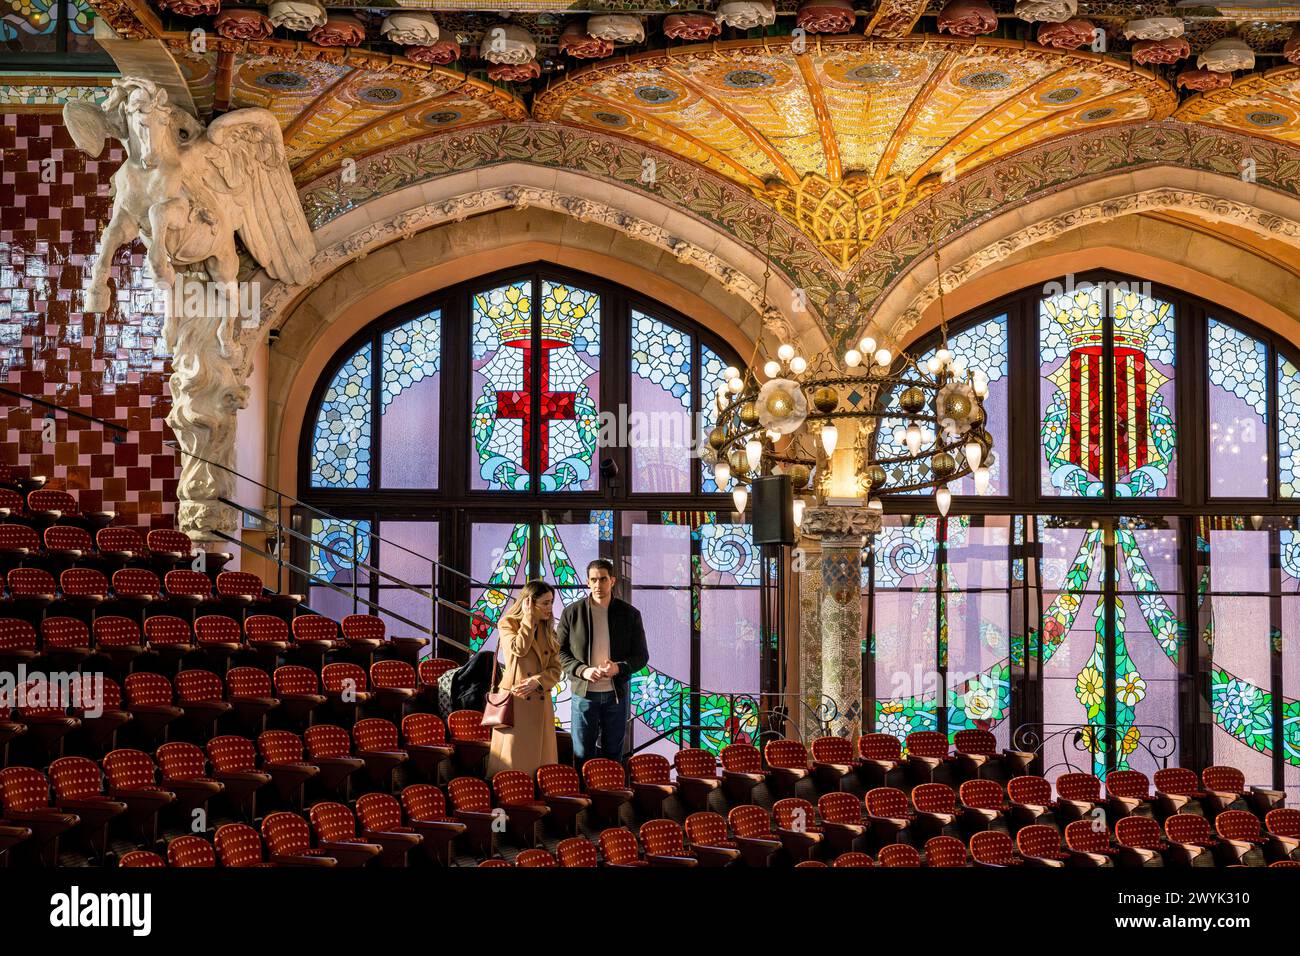 Spain, Catalonia, Barcelona, Palau de la Musica Catalana (Catalan Music Palace), concert hall designed by the architect of Catalan modernism Lluis Domènech i Montaner, a UNESCO World Heritage Site, Pegasus at the start of the second balcony Stock Photo